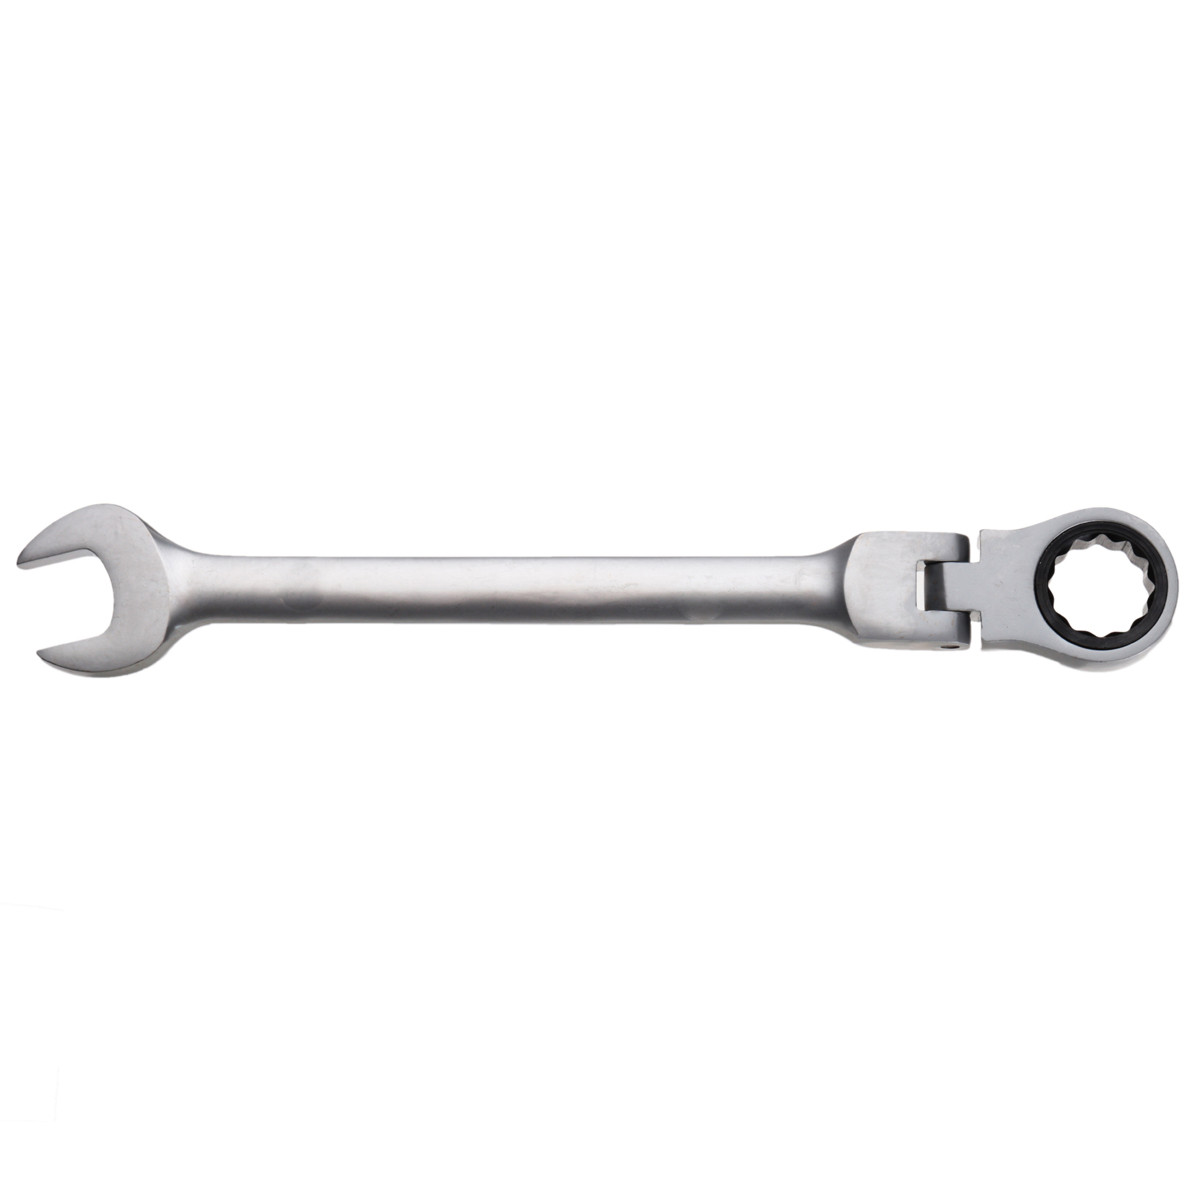 24-mm-CR-V-Steel-Flexible-Head-Ratchet-Wrench-Metric-Spanner-Open-End-amp-Ring-Wrenches-Tool-979829